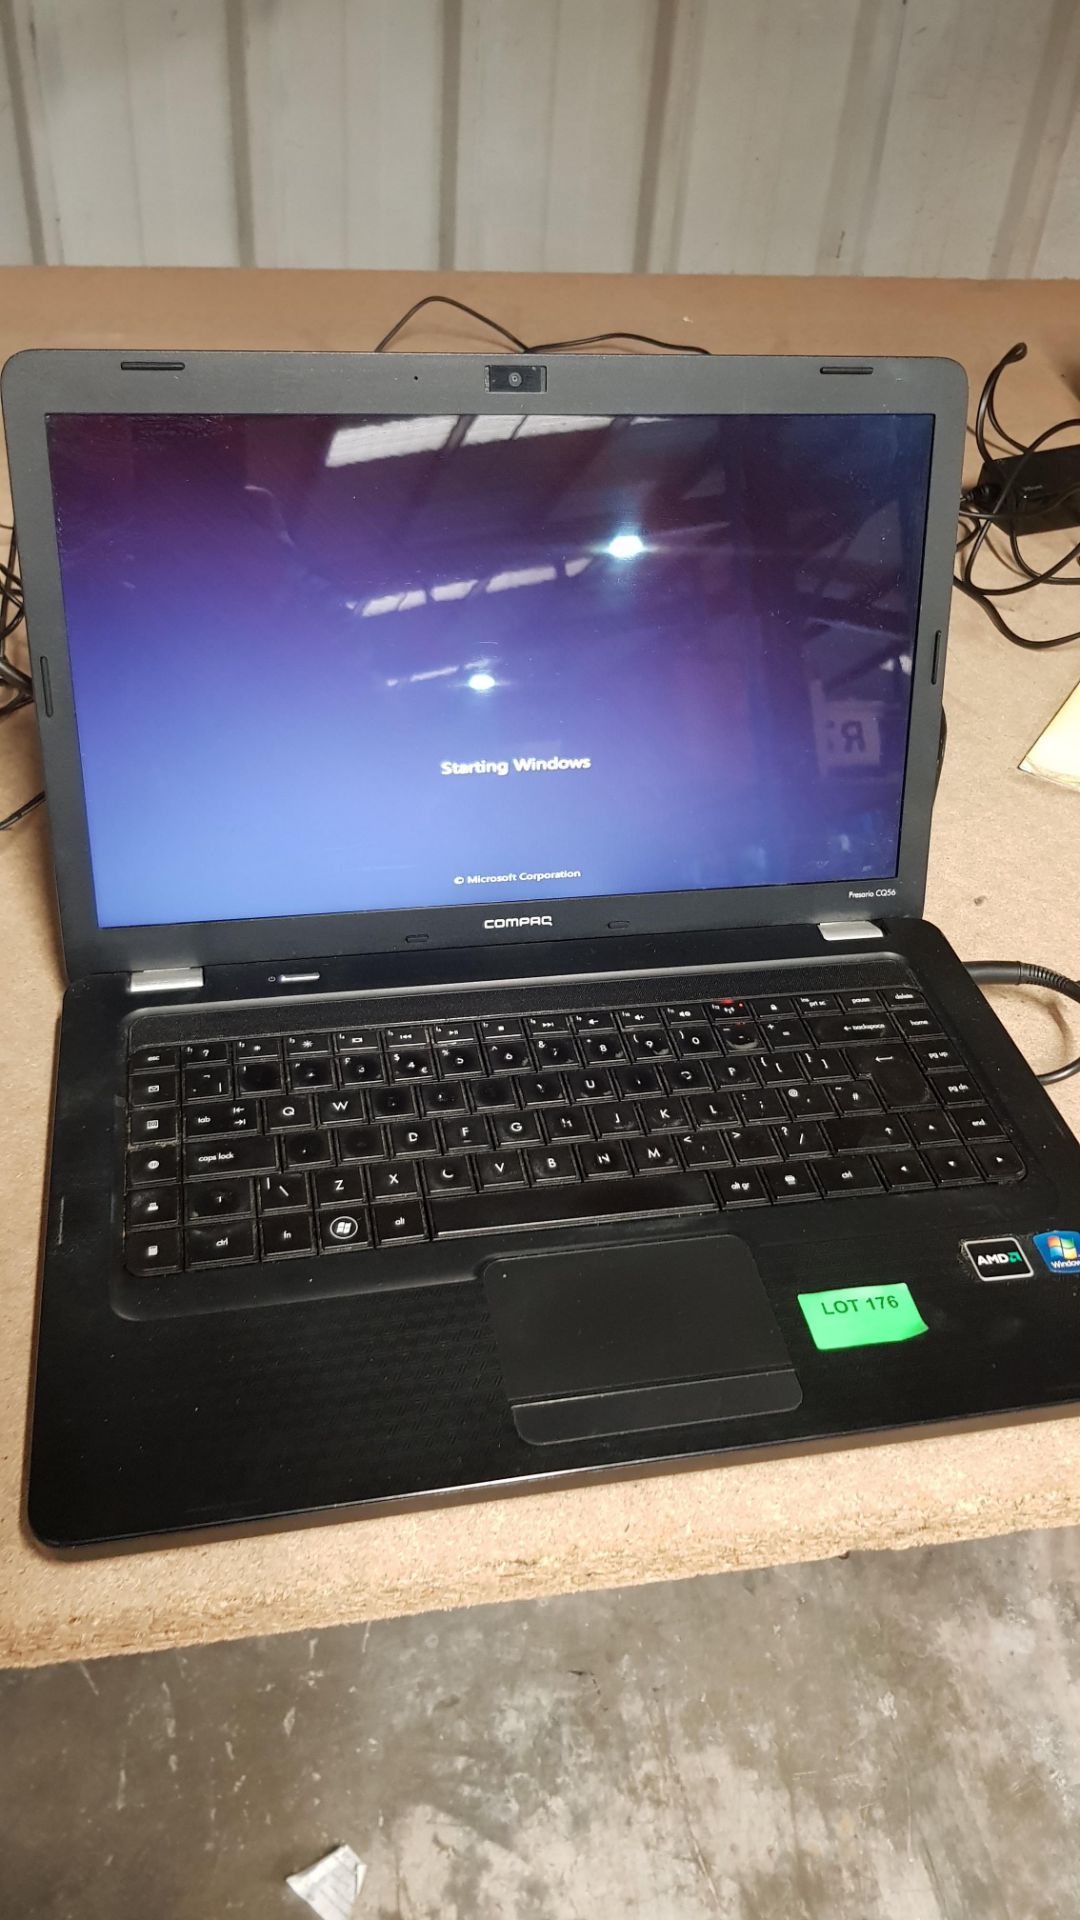 (R9K) Tech. 1 X Compaq Presario CQ56 Laptop (Starts – Password Protected). With Power Lead - Image 2 of 4